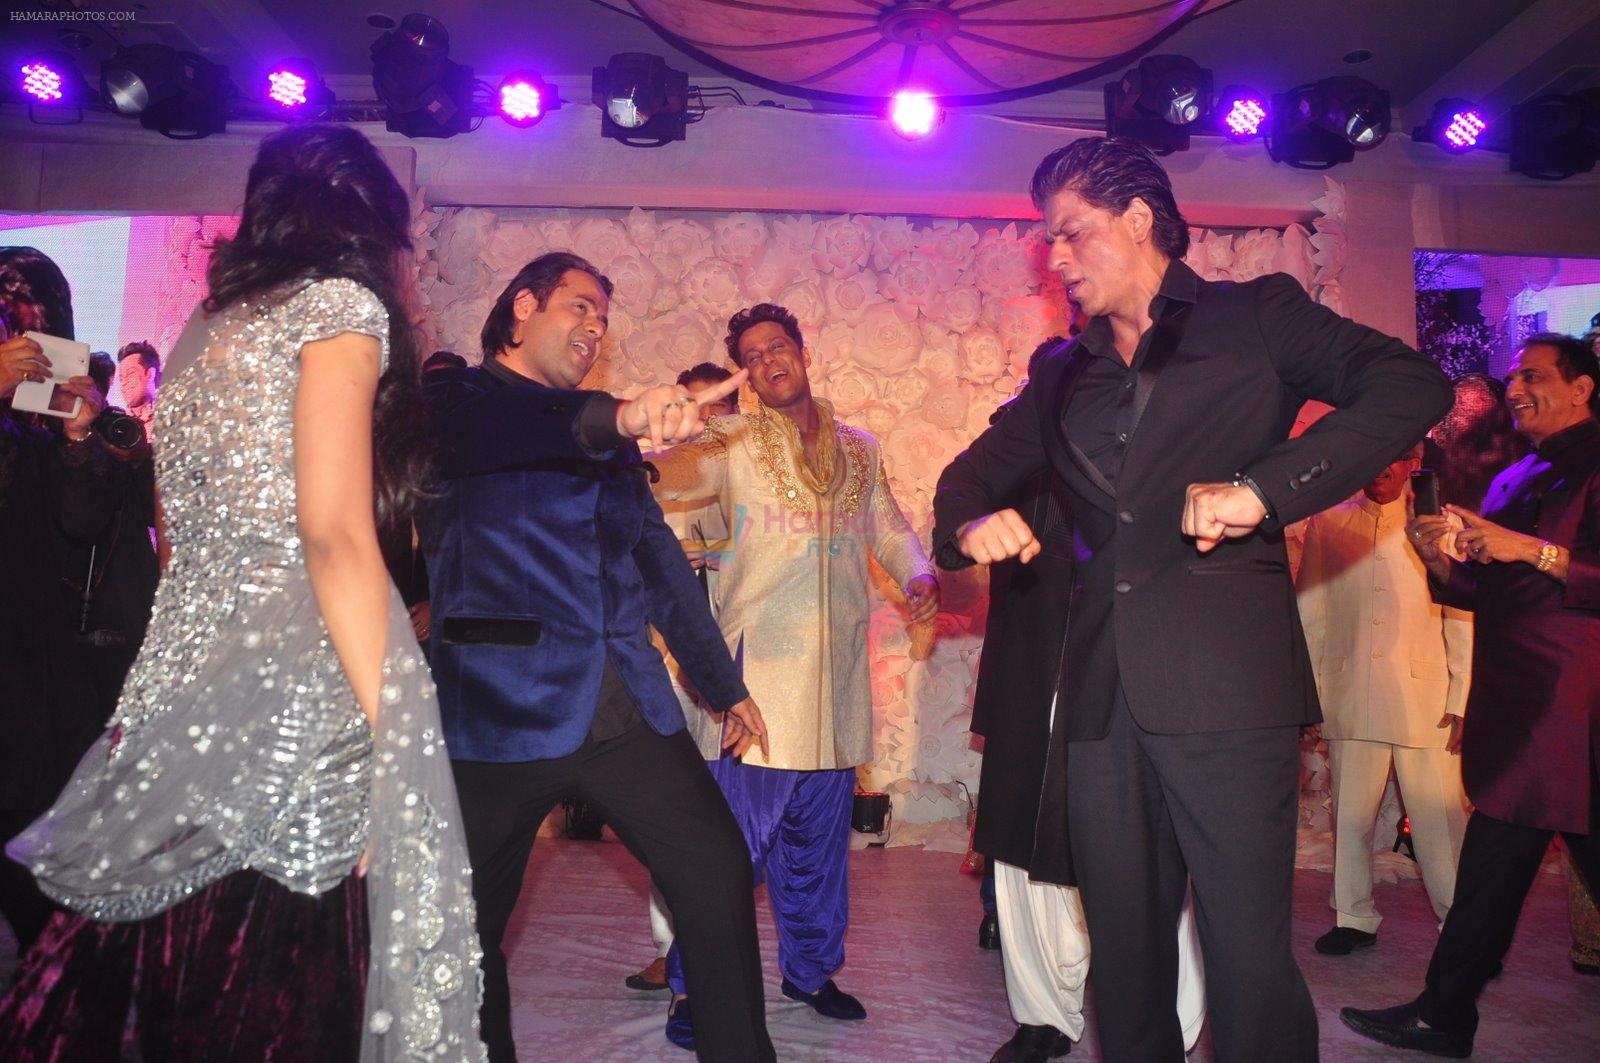 Shahrukh Khan at Vikram Singh's Brother Uday Singh and Ali Morani's daughter Shirin's Sangeet Ceremony on 18th Dec 2014